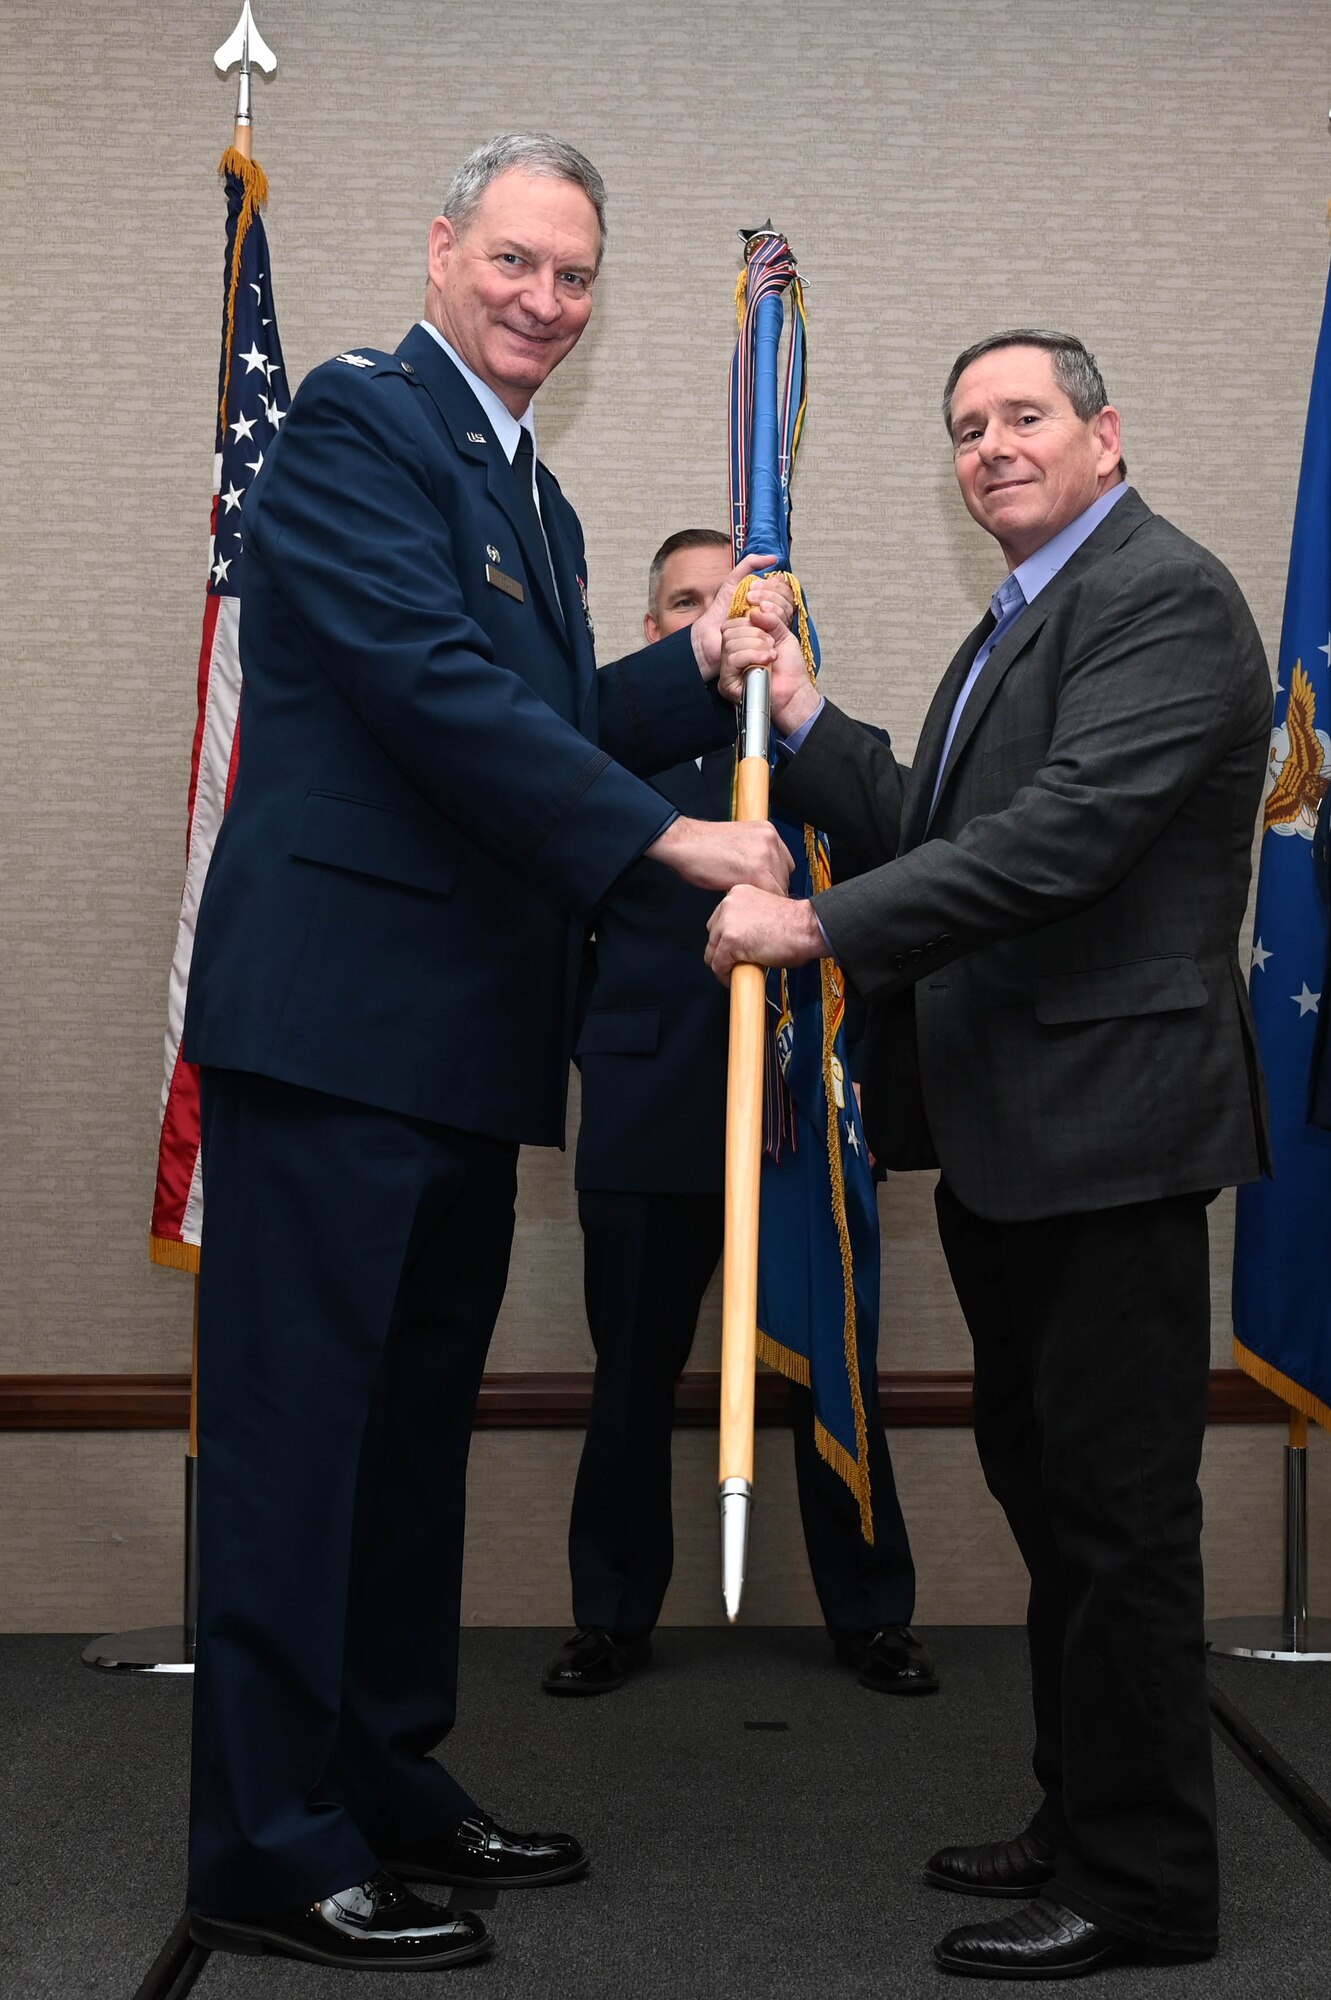 Col. Terry McClain, 433rd Airlift Wing commander, hands the 433rd AW guidon to Lee Randolph, managing partner of UBuildIt-Schertz, Texas, during the Honorary Commanders’ Induction Ceremony in San Antonio, July 9, 2022. Honorary commanders have opportunities to learn about their units and commanders through C-5M Super Galaxy tours, demonstrations, events and flights. (U.S. Air Force photo by Senior Airman Brittany Wich)